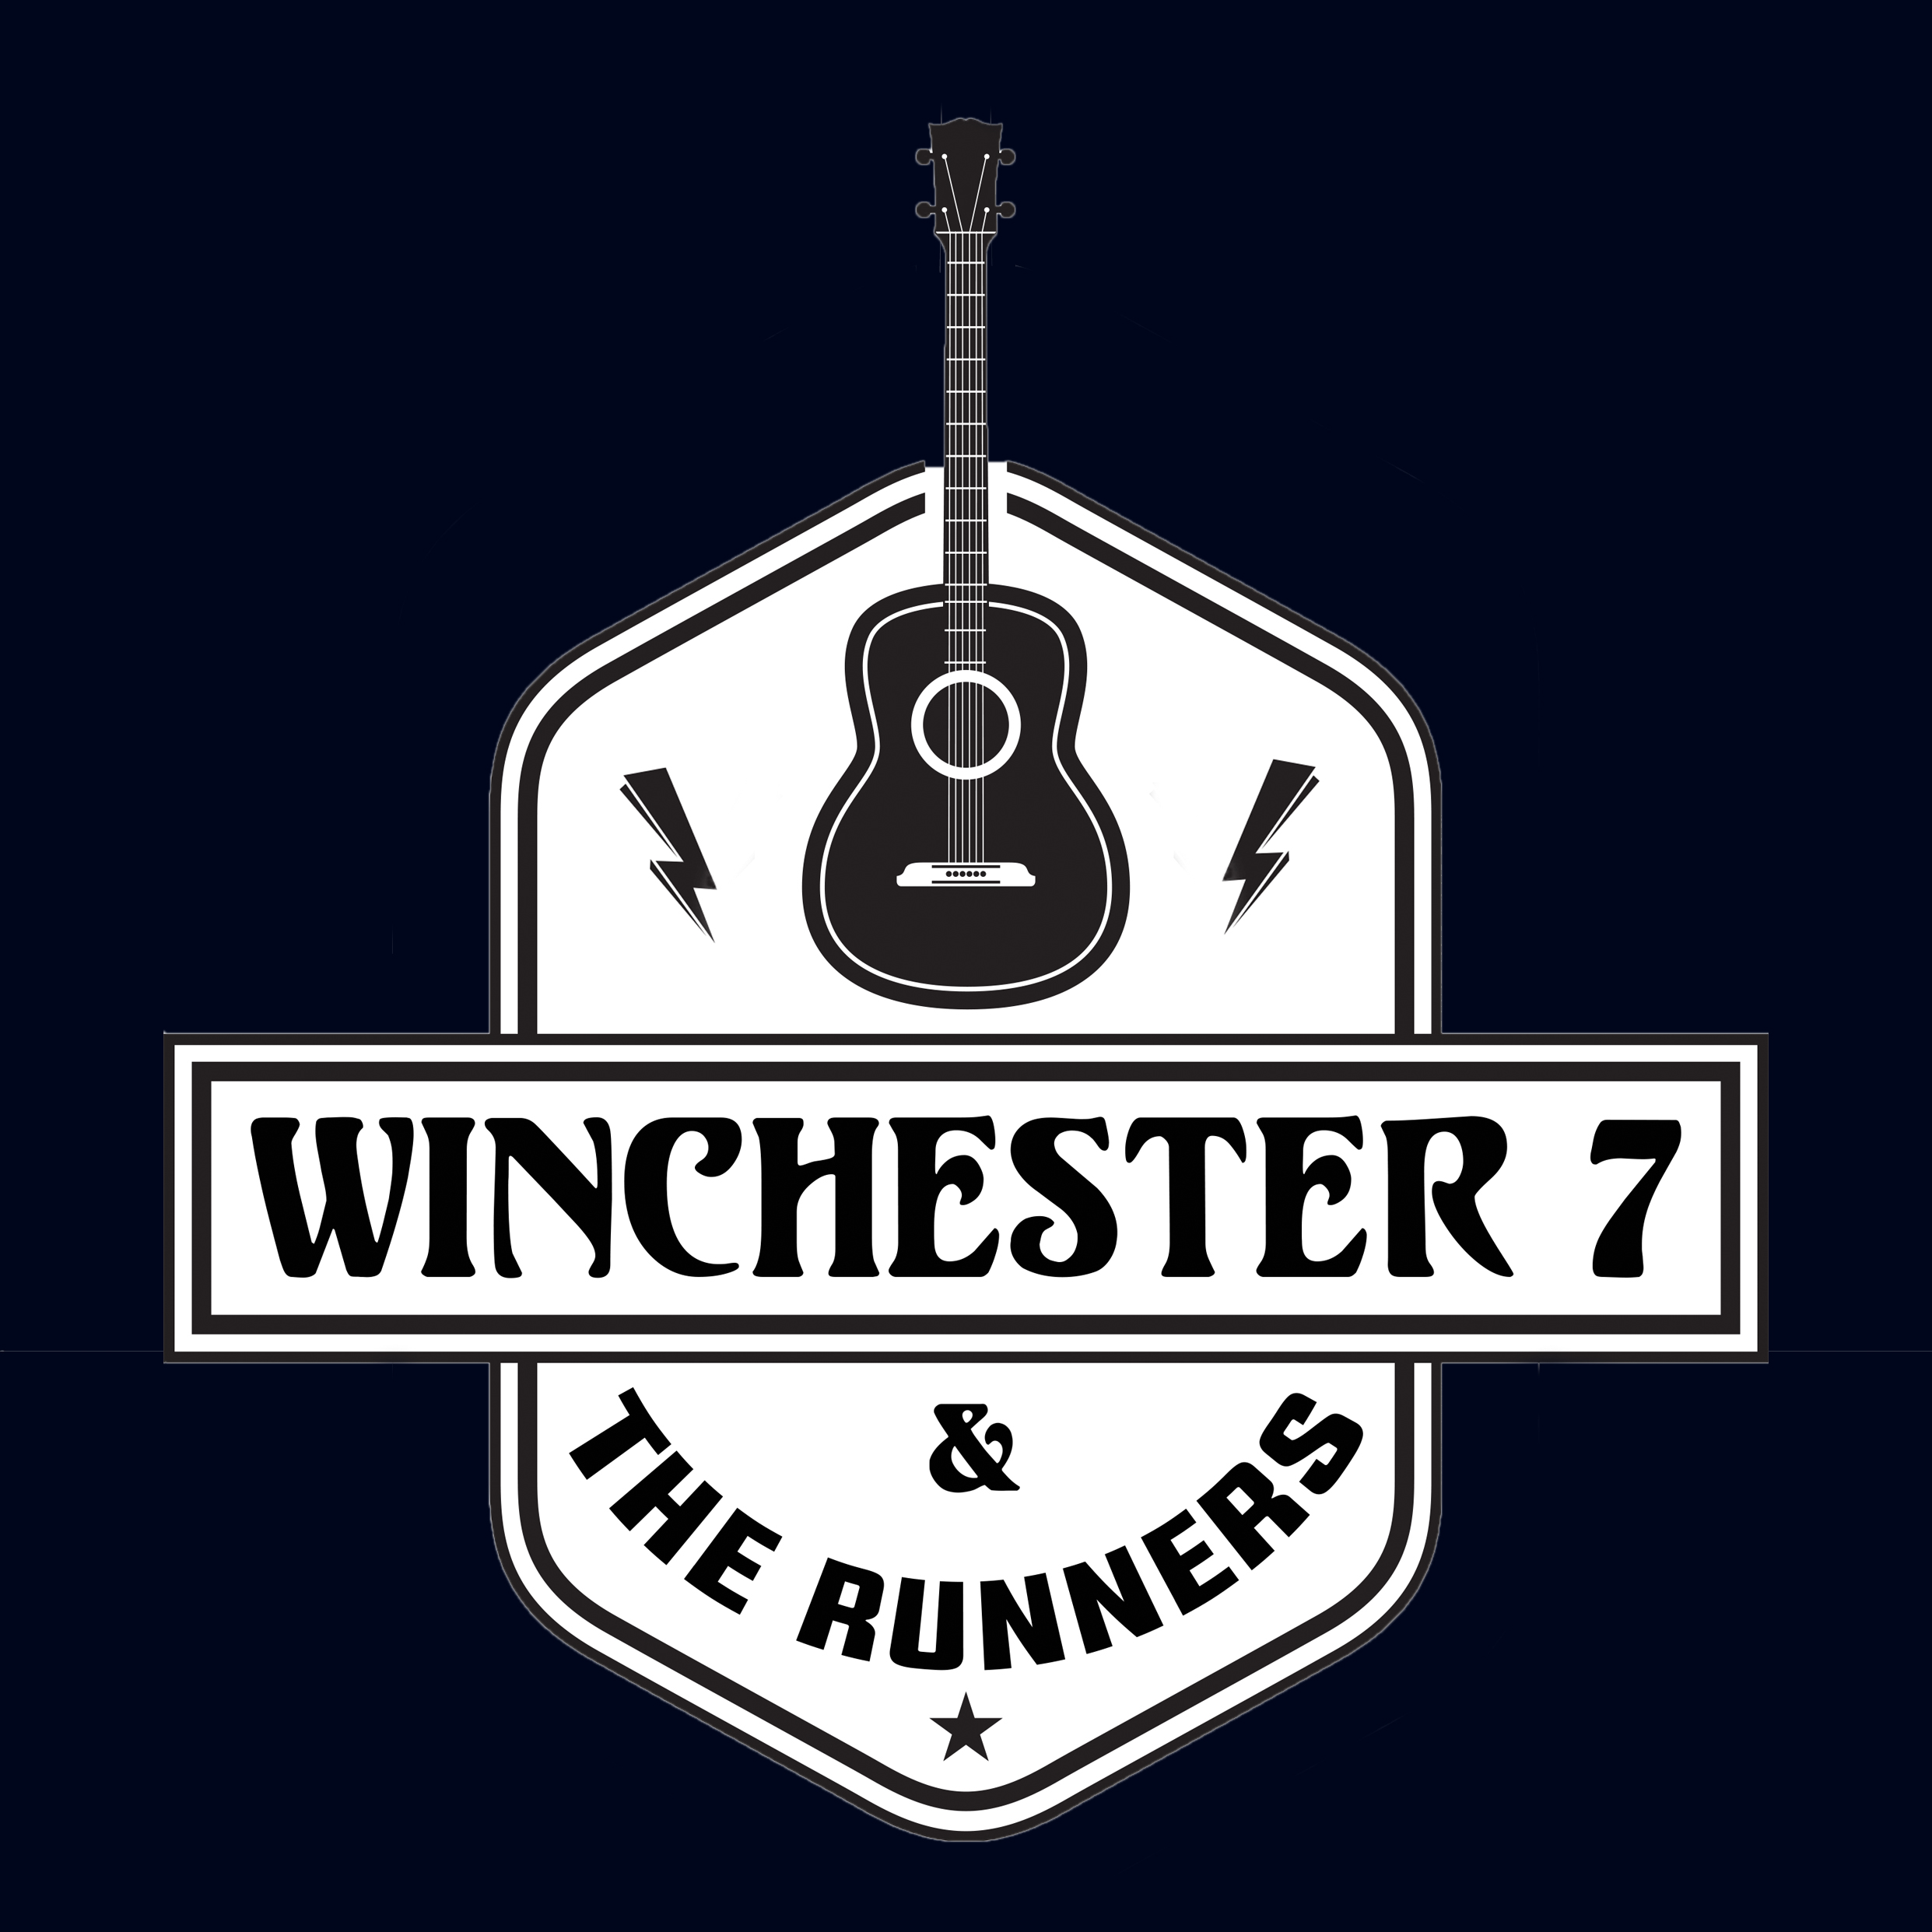 Winchester 7 & the Runners